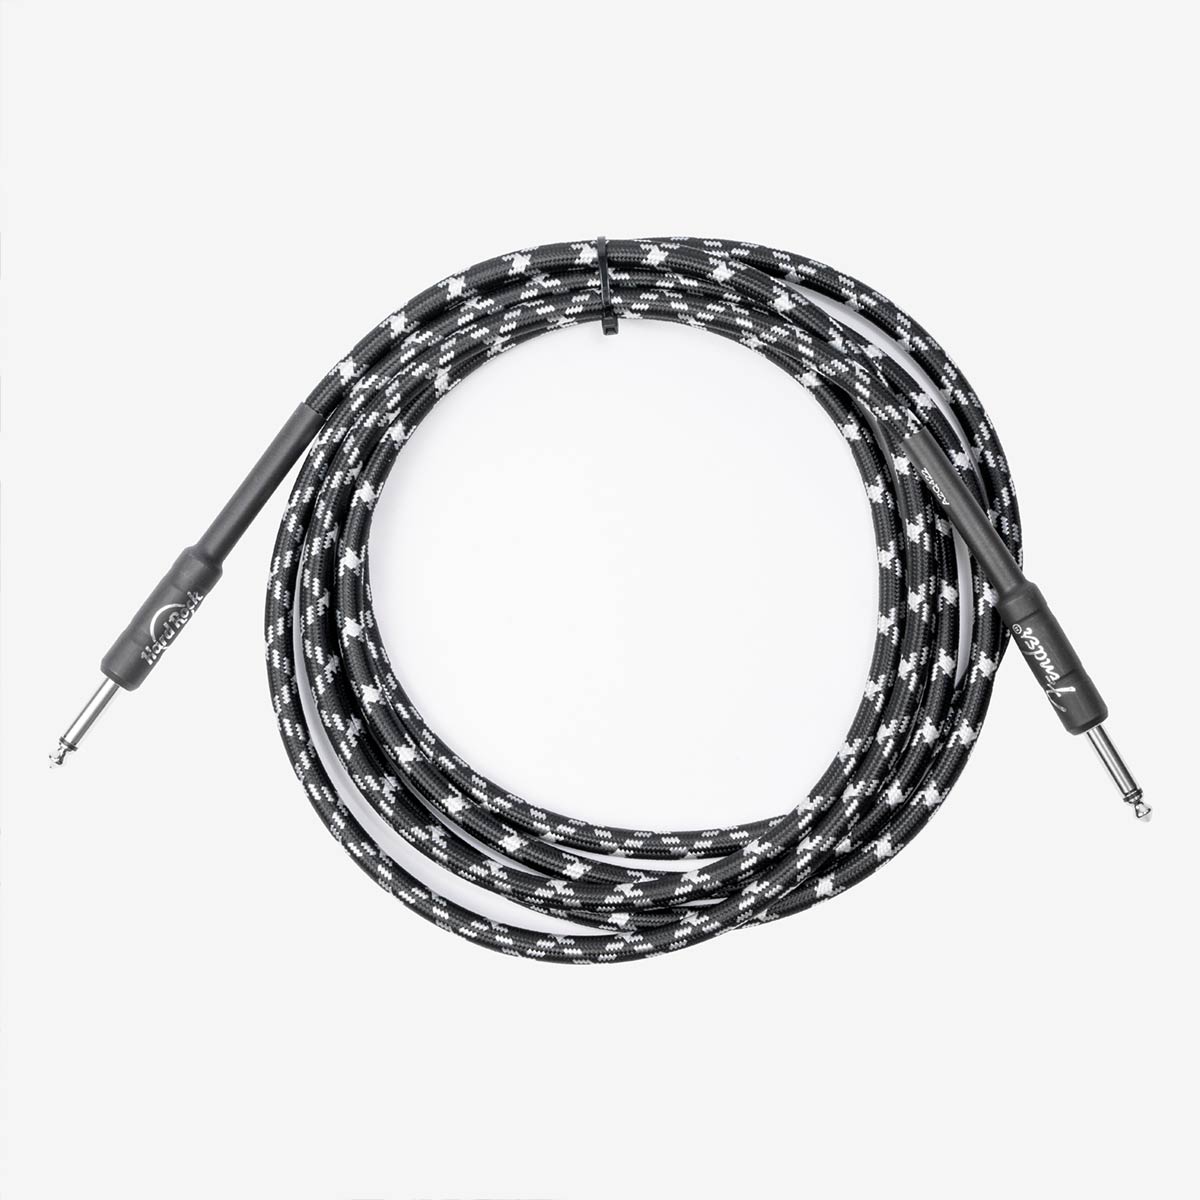 Fender x Hard Rock Instrument Cable 10 Foot in Black Tweed and Camo image number 6